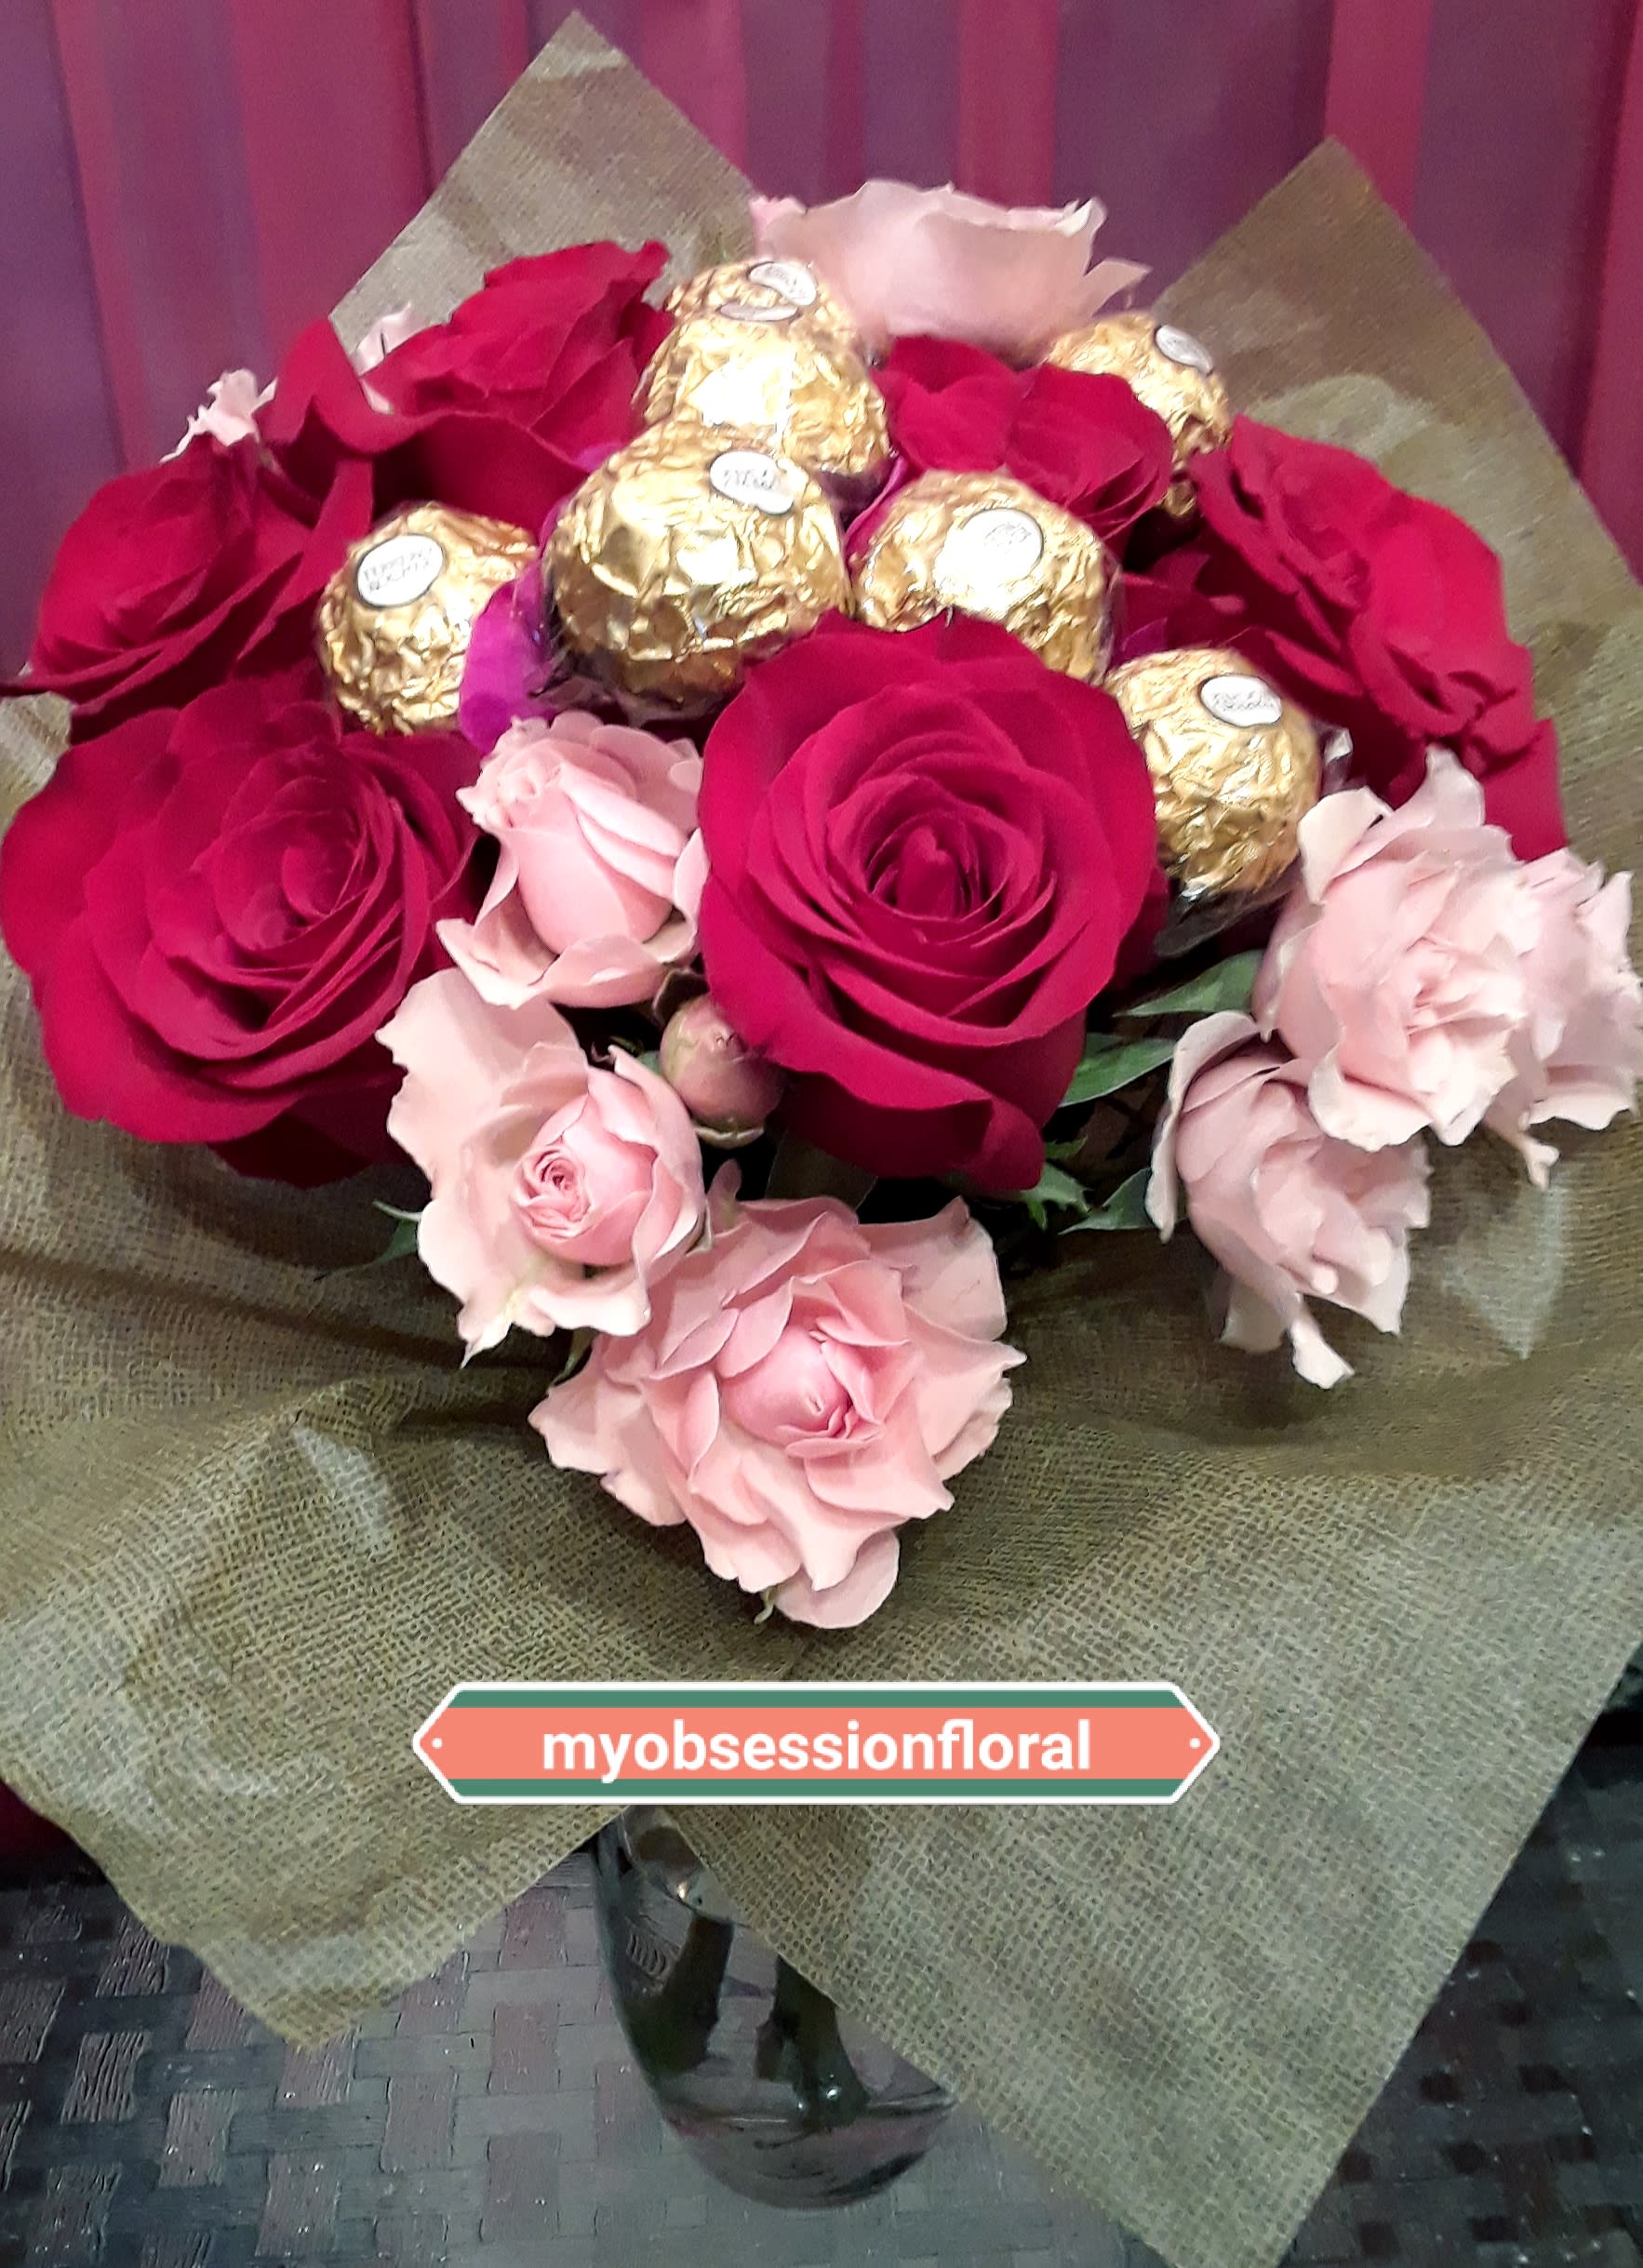 My Obsession roses and chocolates, MO-RP - We thought of some new concept to add to our selection, and have come up with this stunning mix of roses, spray roses, and chocolates bouquet, to sweeten up our collection of beautiful florals! My Obsession Exclusive, please choose from small, medium, or large bouquet arranged. 